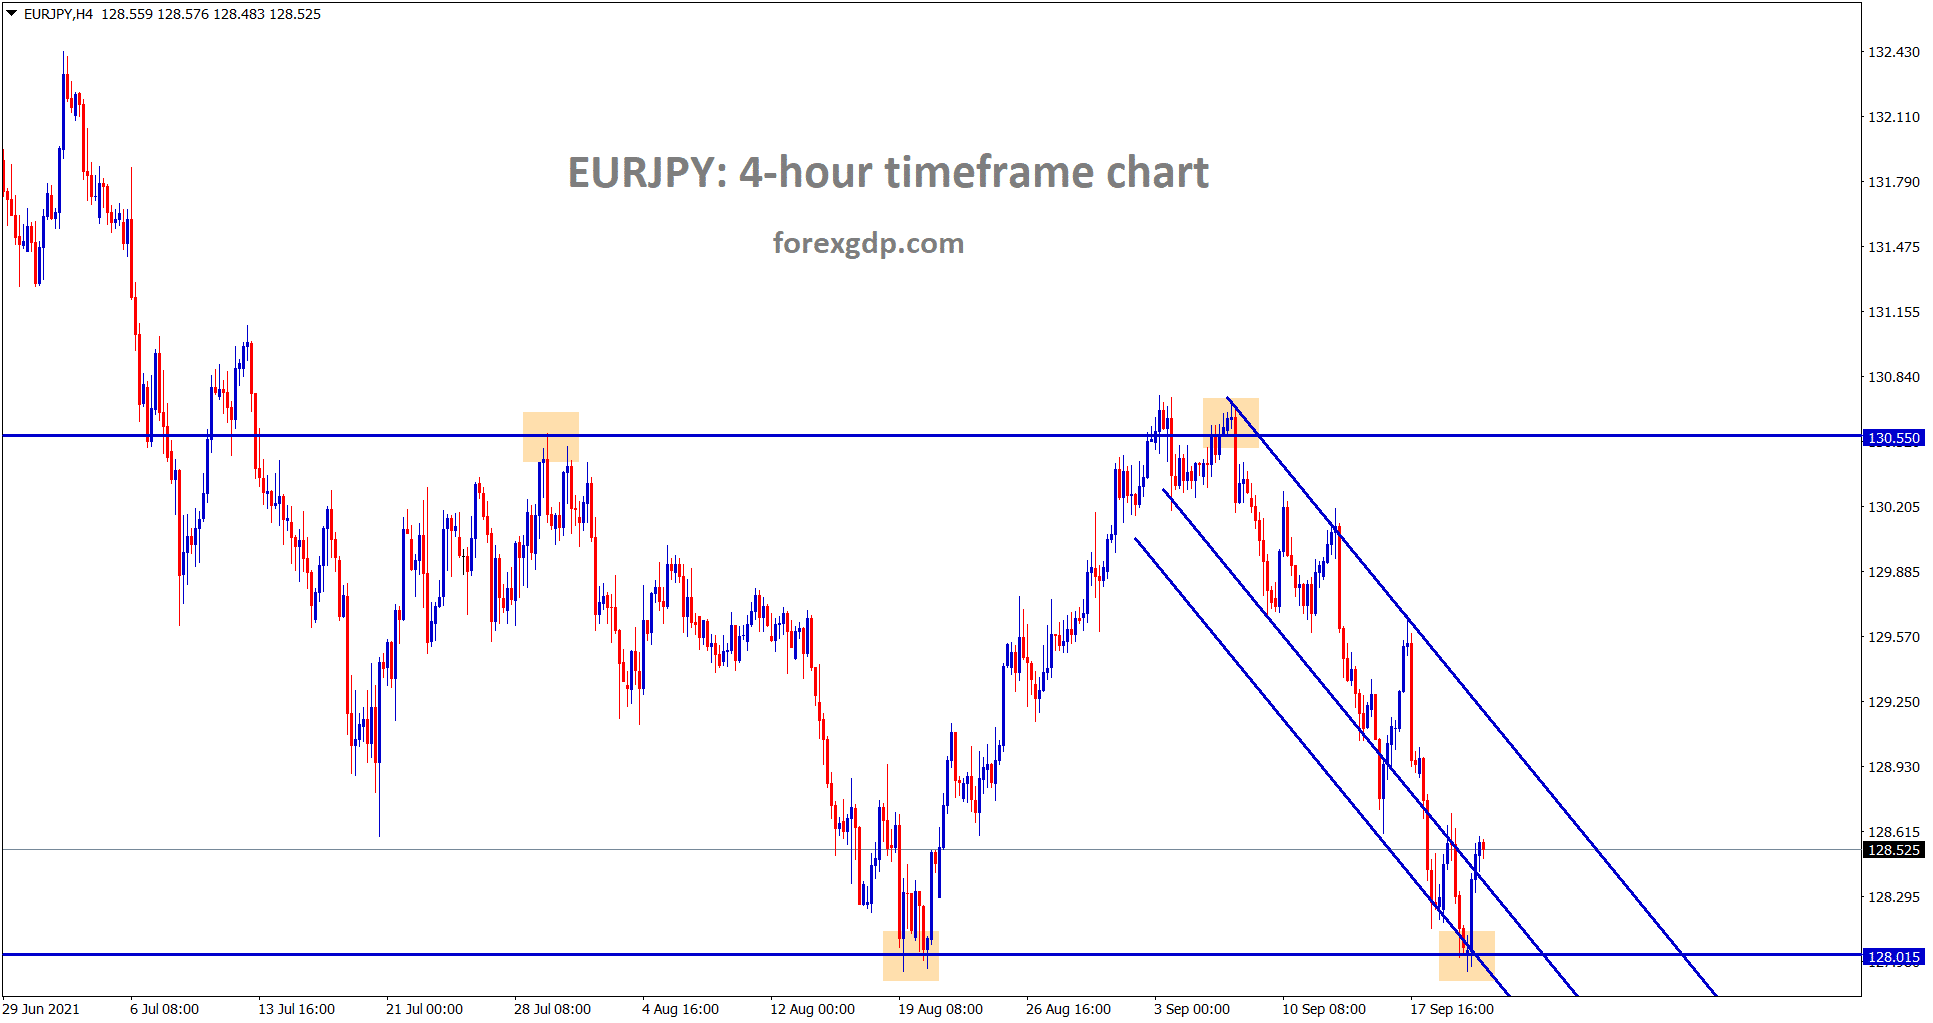 EURJPY is still moving in a descending channel range and recently rebound from the support area